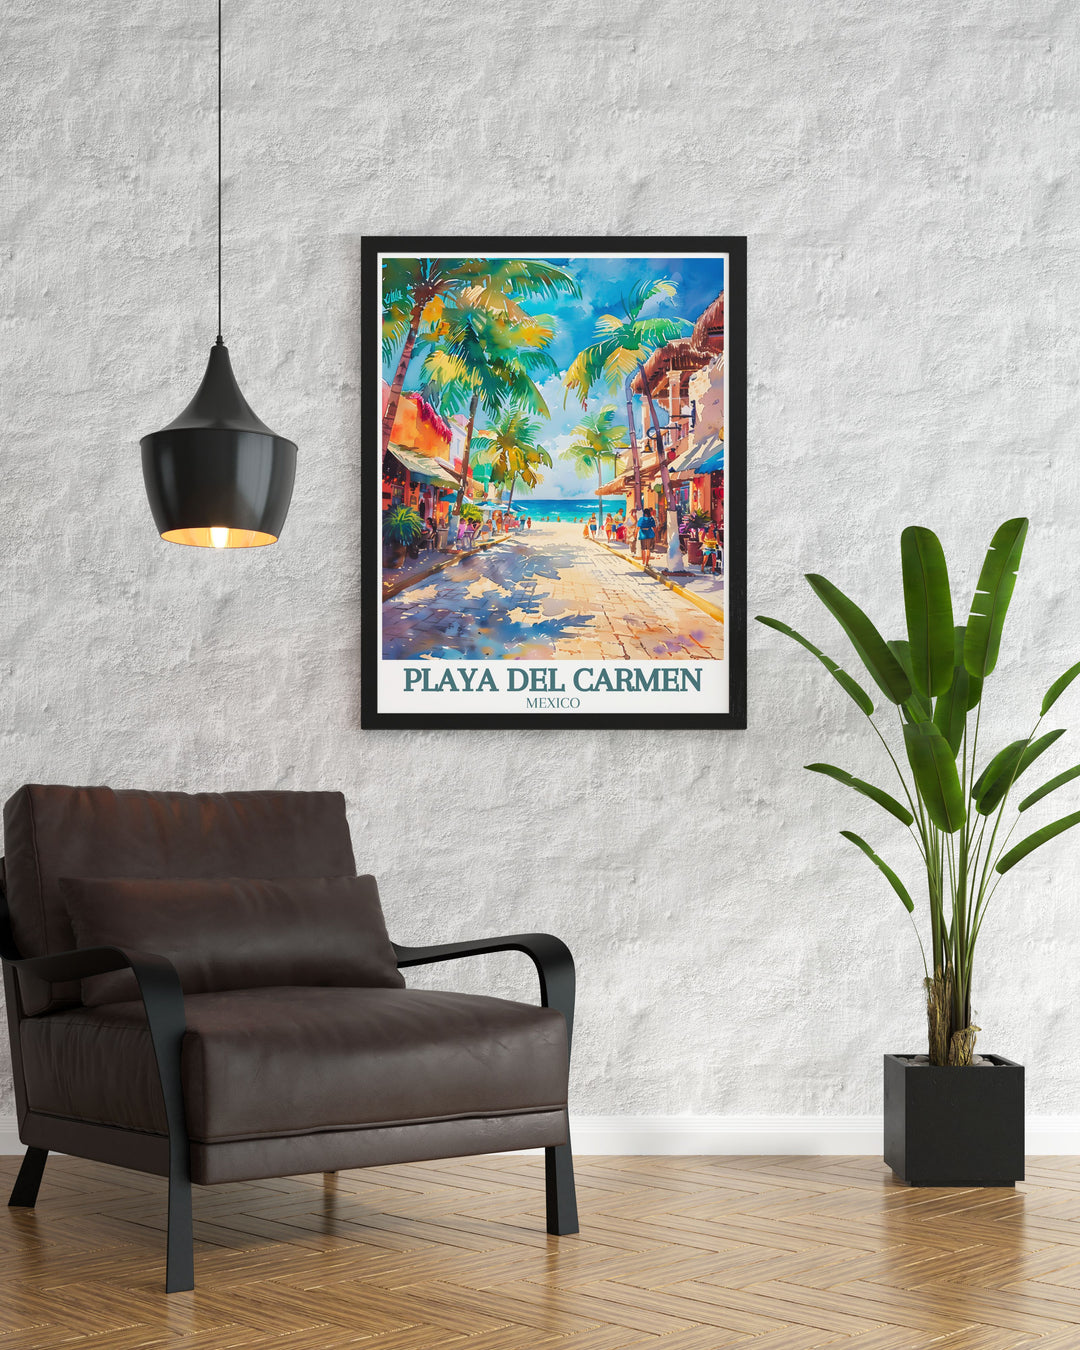 Beautifully crafted Mexico artwork featuring La Quinta Avenida and the Caribbean Sea ideal for enhancing any room with the vibrant colors and lively atmosphere of Playa Del Carmen perfect for art lovers and travelers.